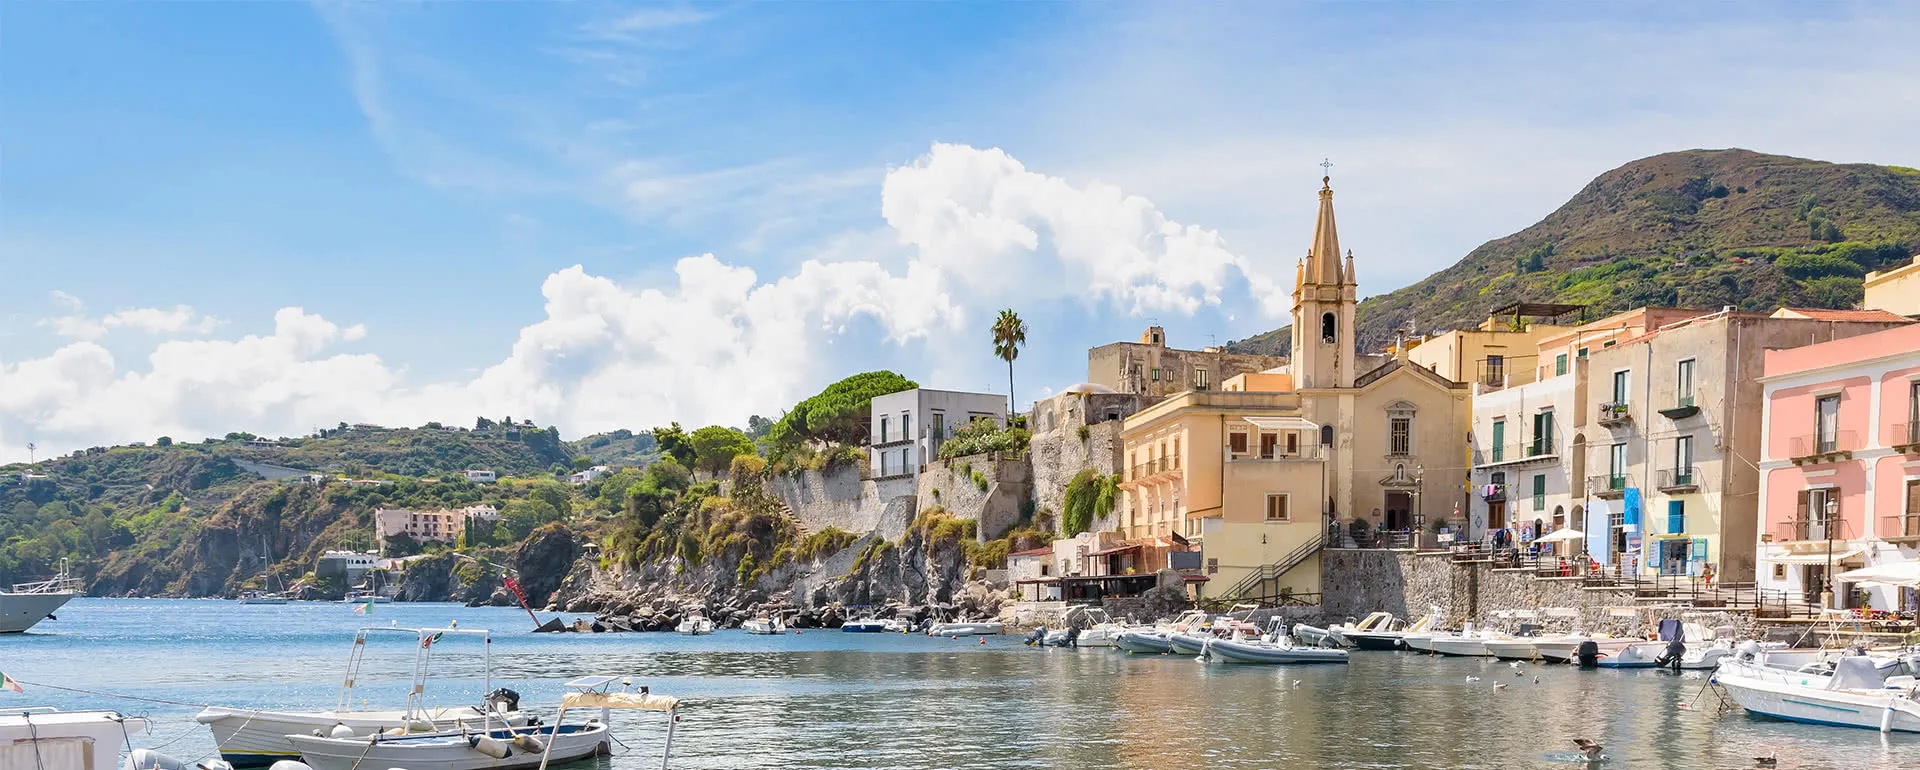 Lipari - the destination with youth hostels